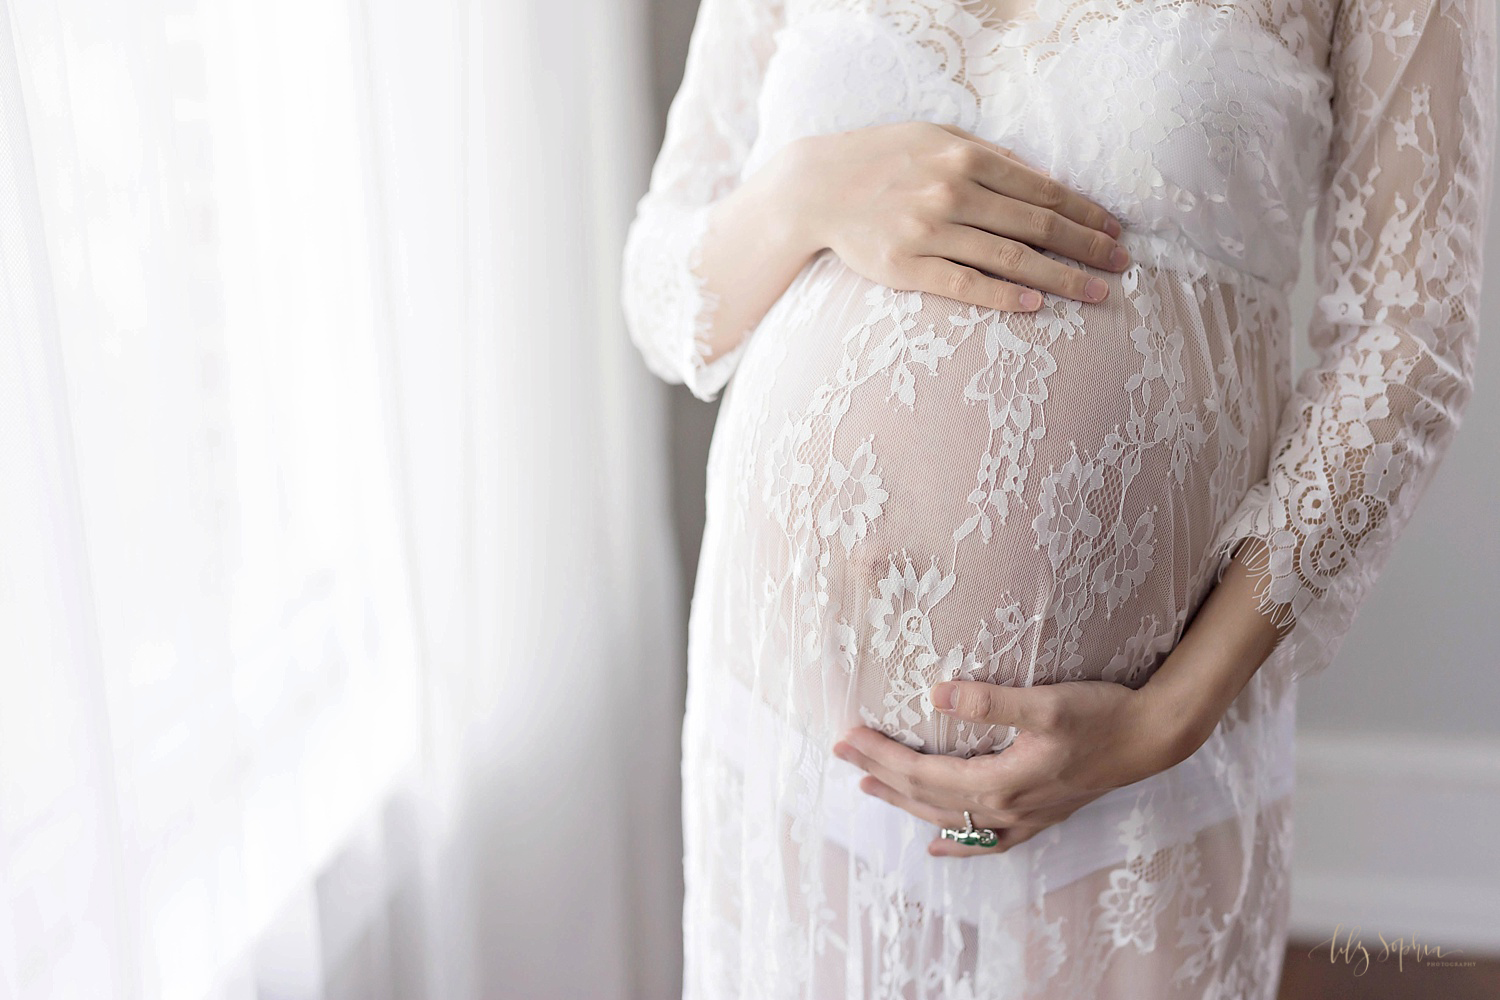  Image of pregnant woman's belly dressed in a white sheer lace dress taken in a natural light studio in Atlanta.&nbsp; 